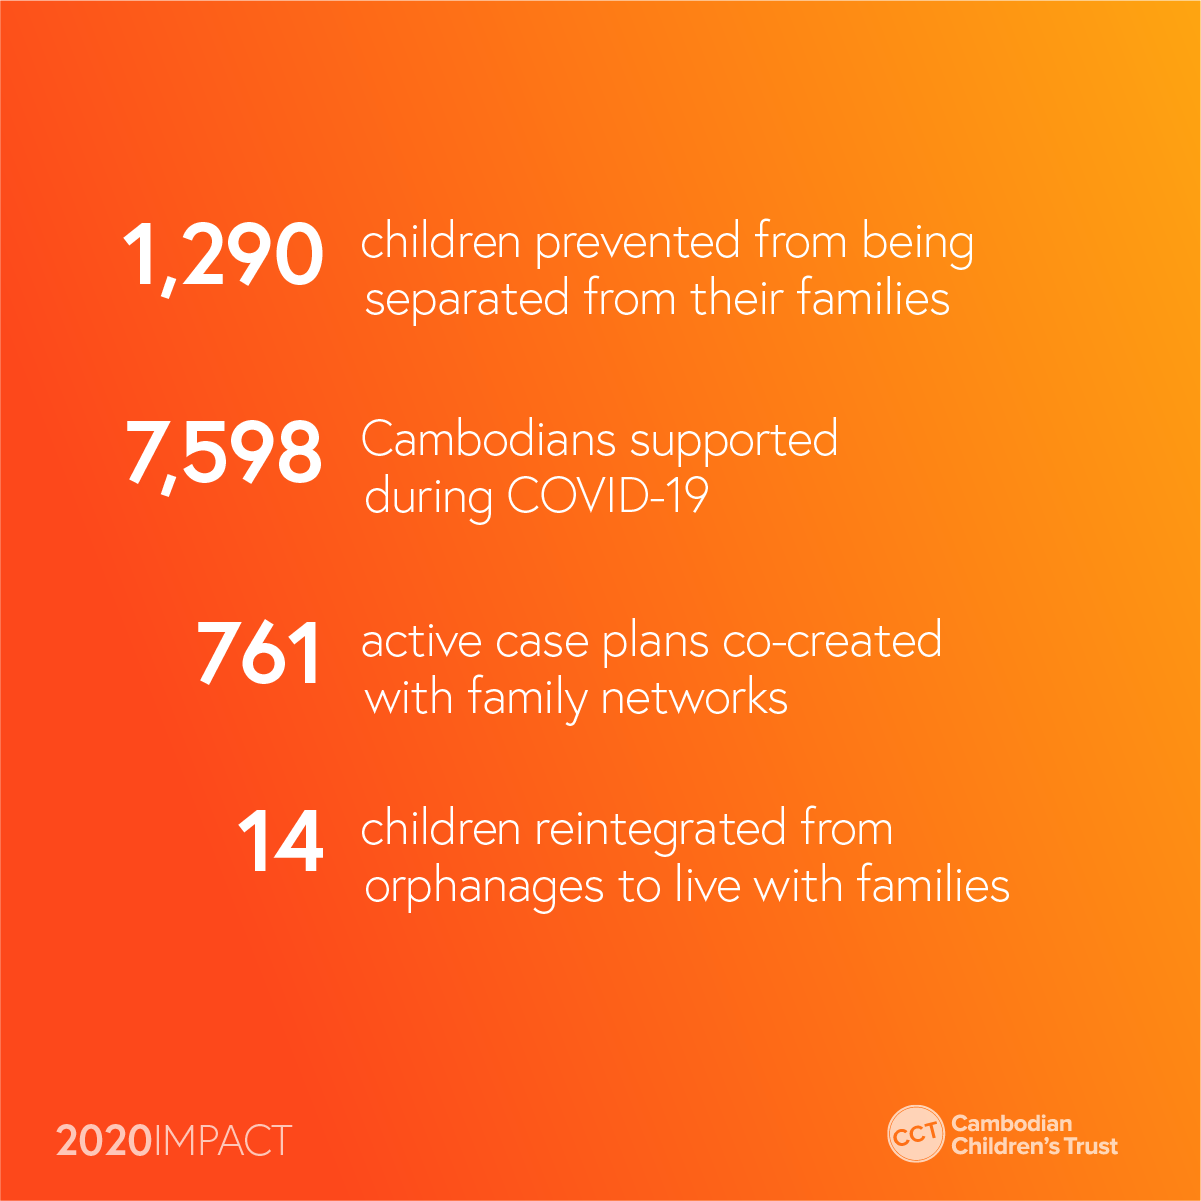 1290 children prevented from being separated from their families. 7598 Cambodians supported during covid-19.. 761active case plans co-created with family networks. 14children reintergrated from orphanages to live with families